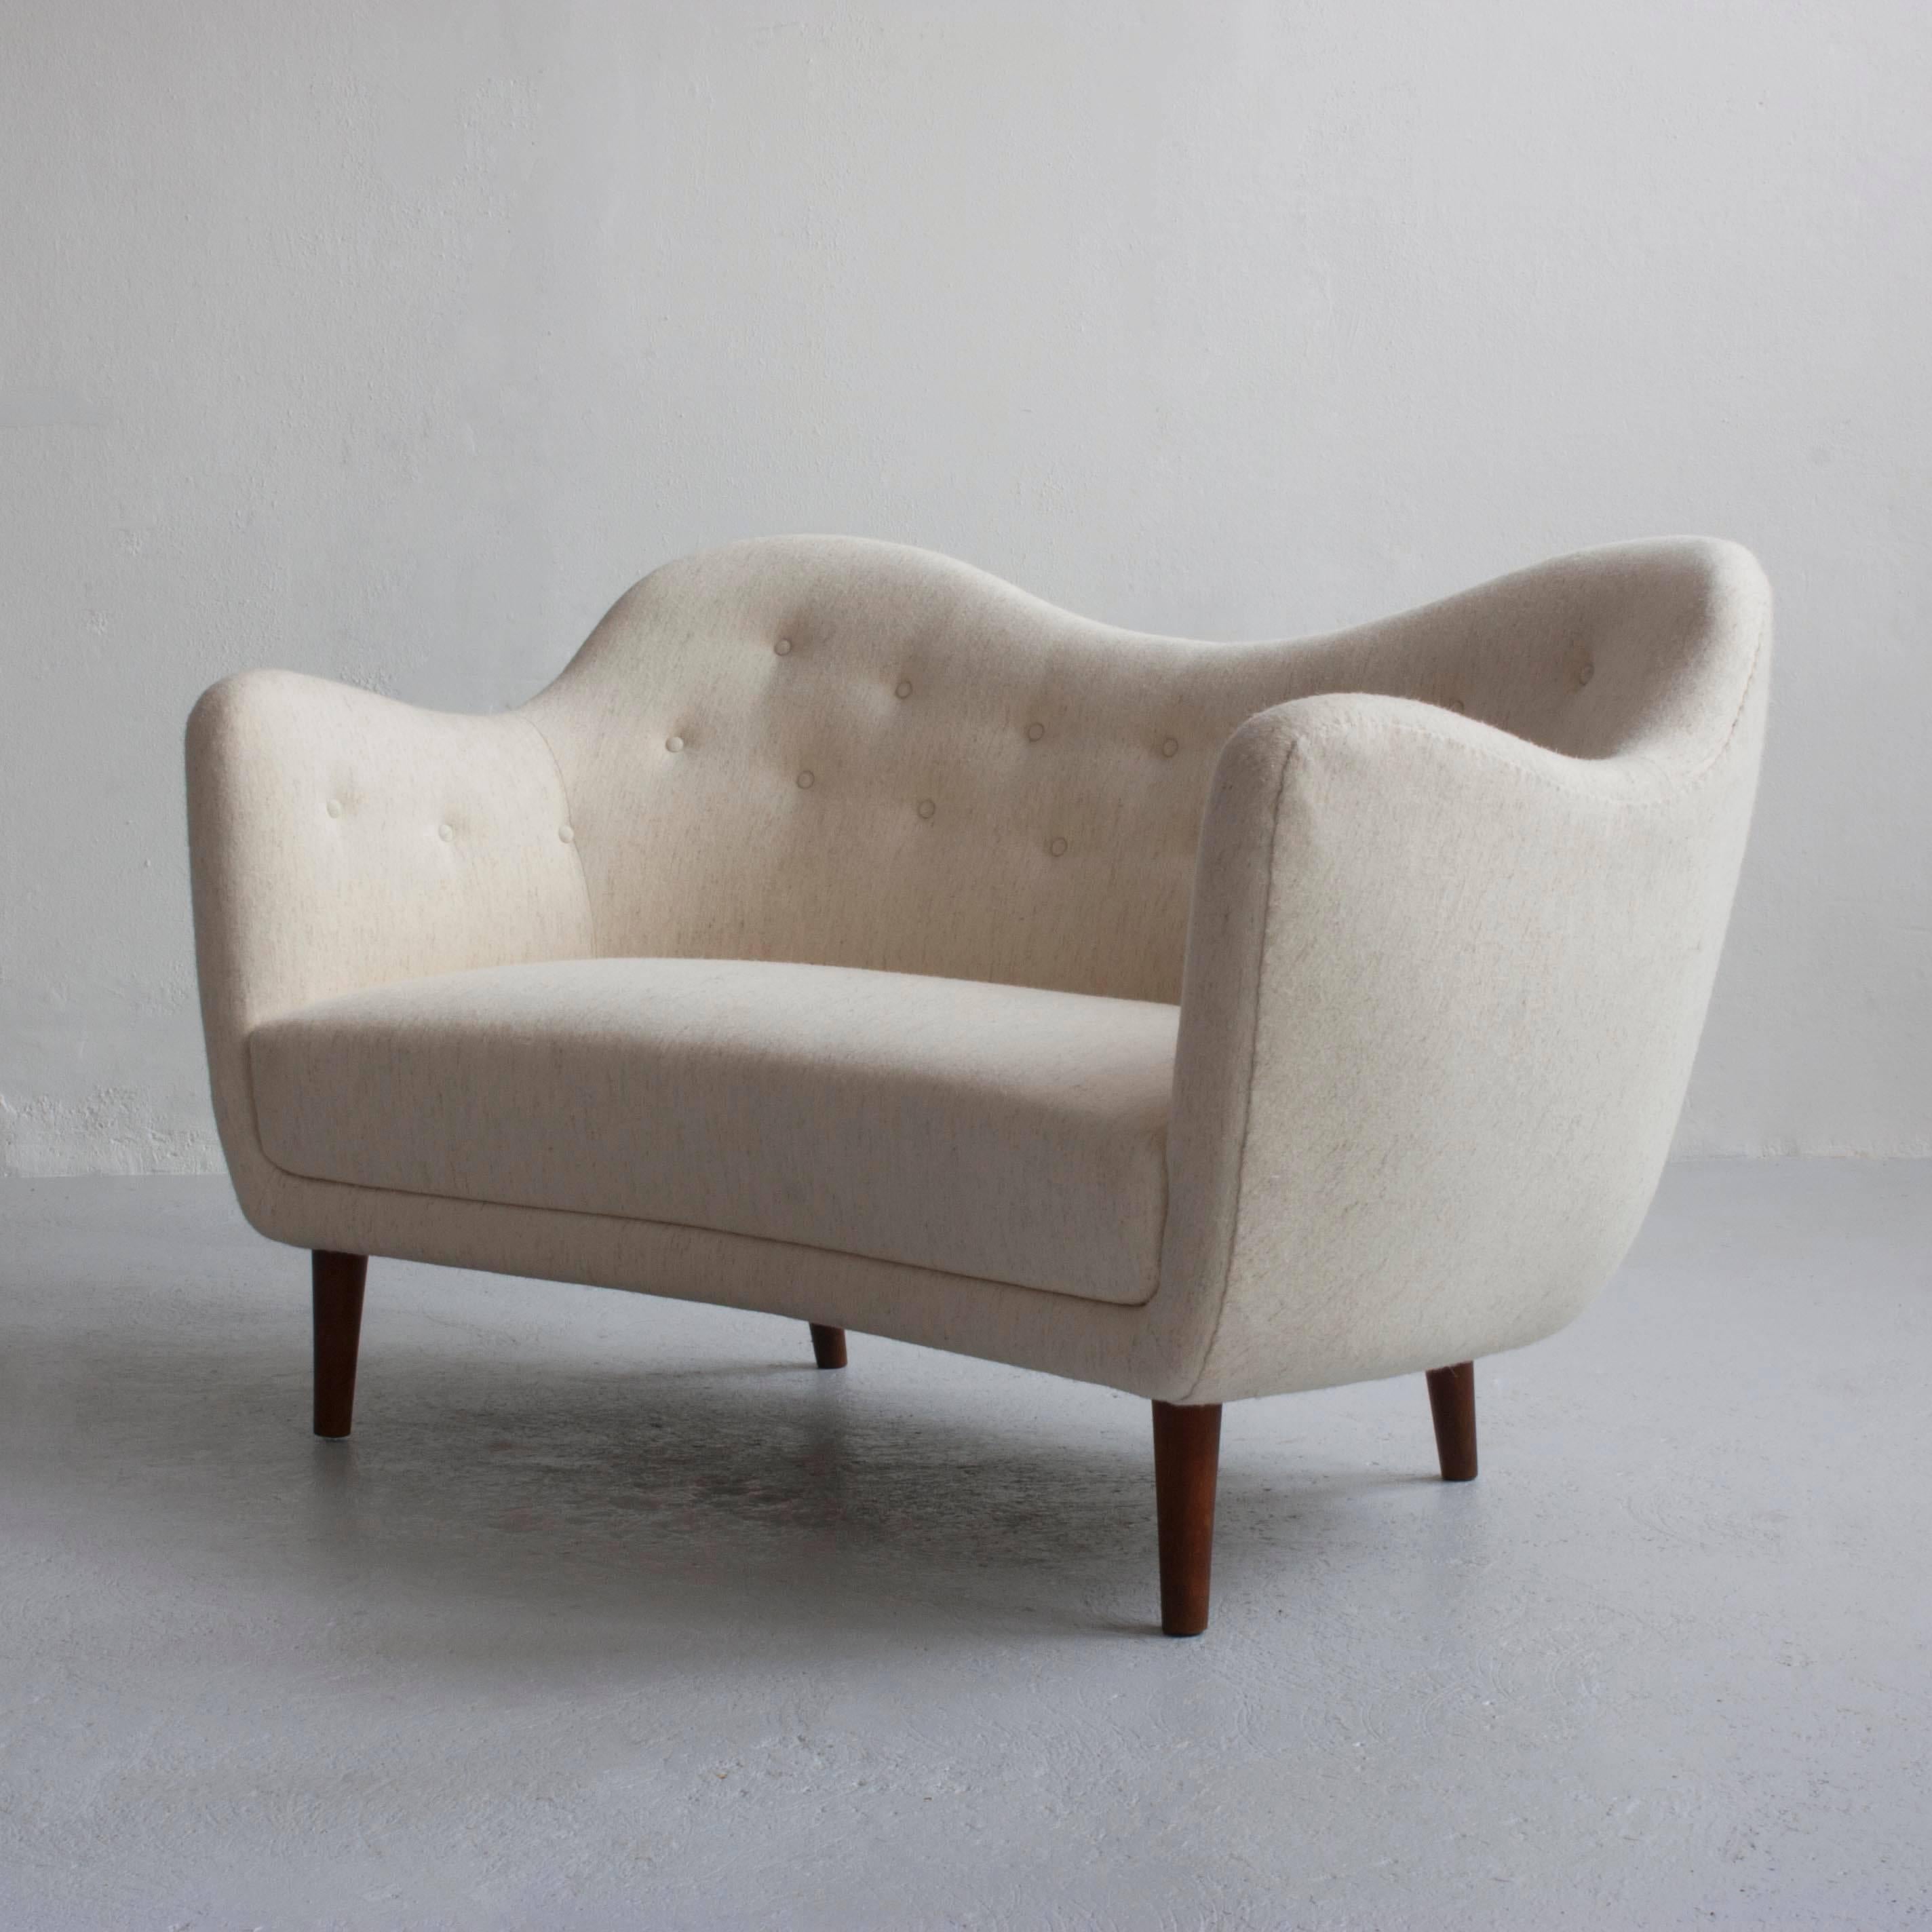 Finn Juhl two person BO46 sofa upholstered with off-white wool, tapering legs of stained beech. 

Designed by Finn Juhl, 1946 and manufactured by Bovirke, Denmark, 1948.